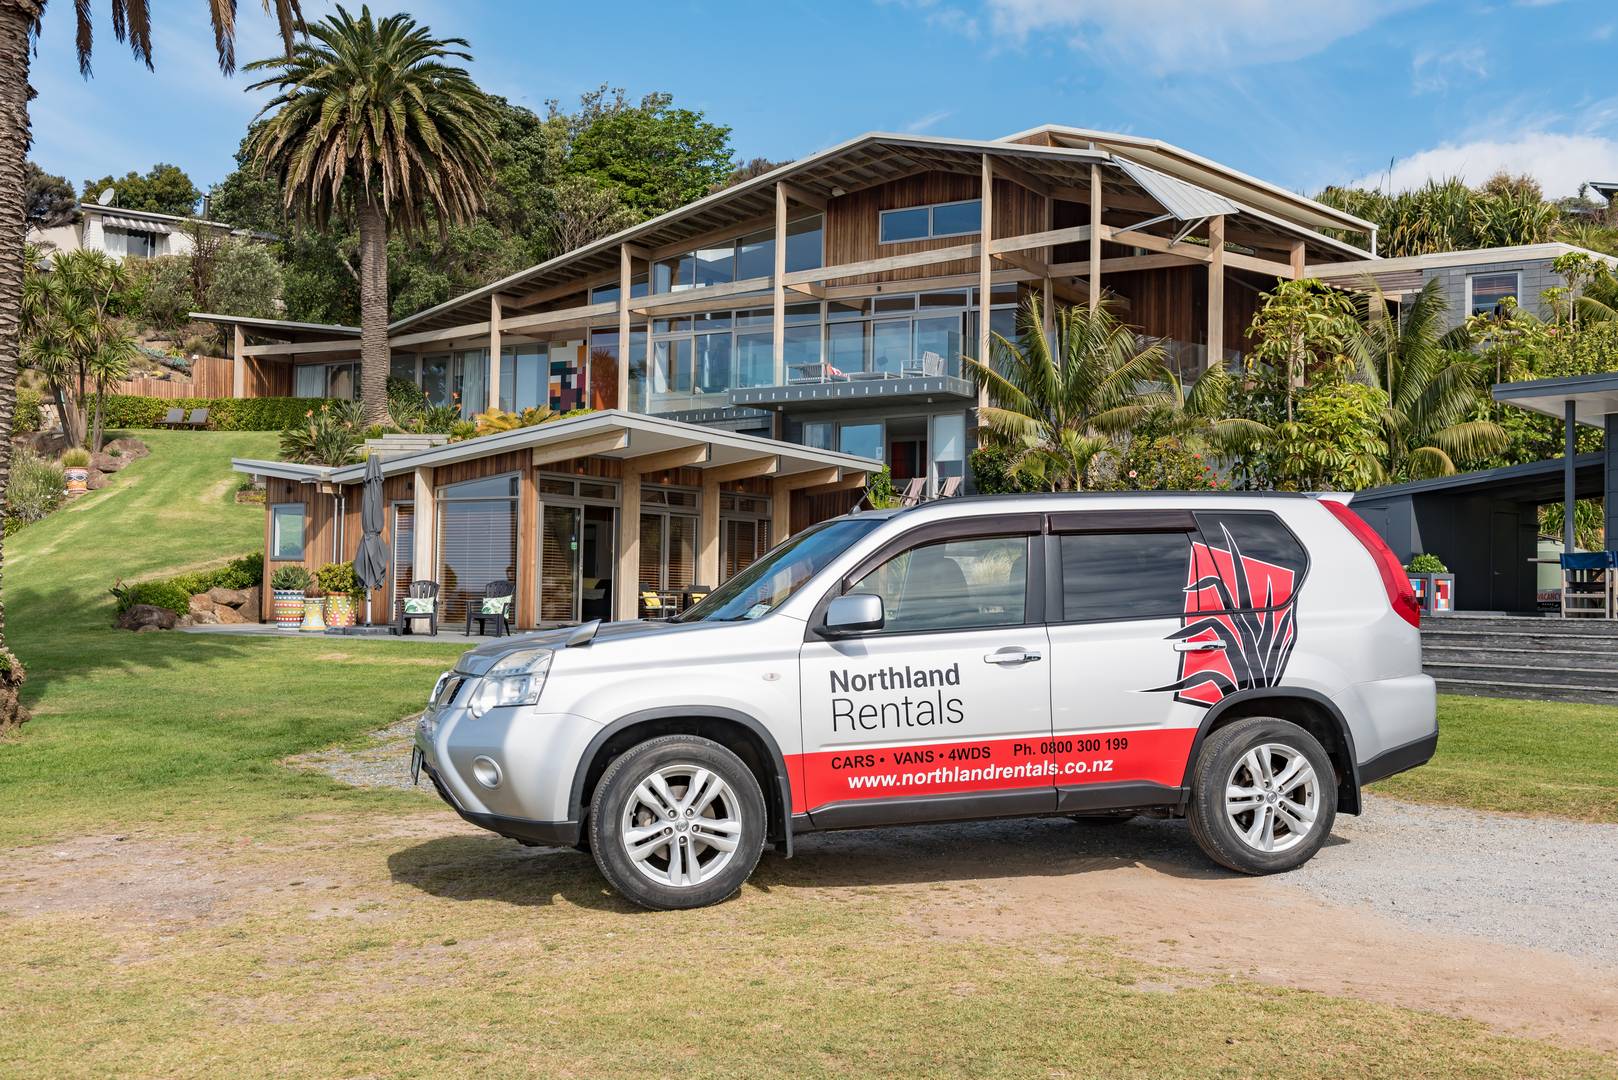 Northland Rentals car at the Golden Sand beachfront accommodation